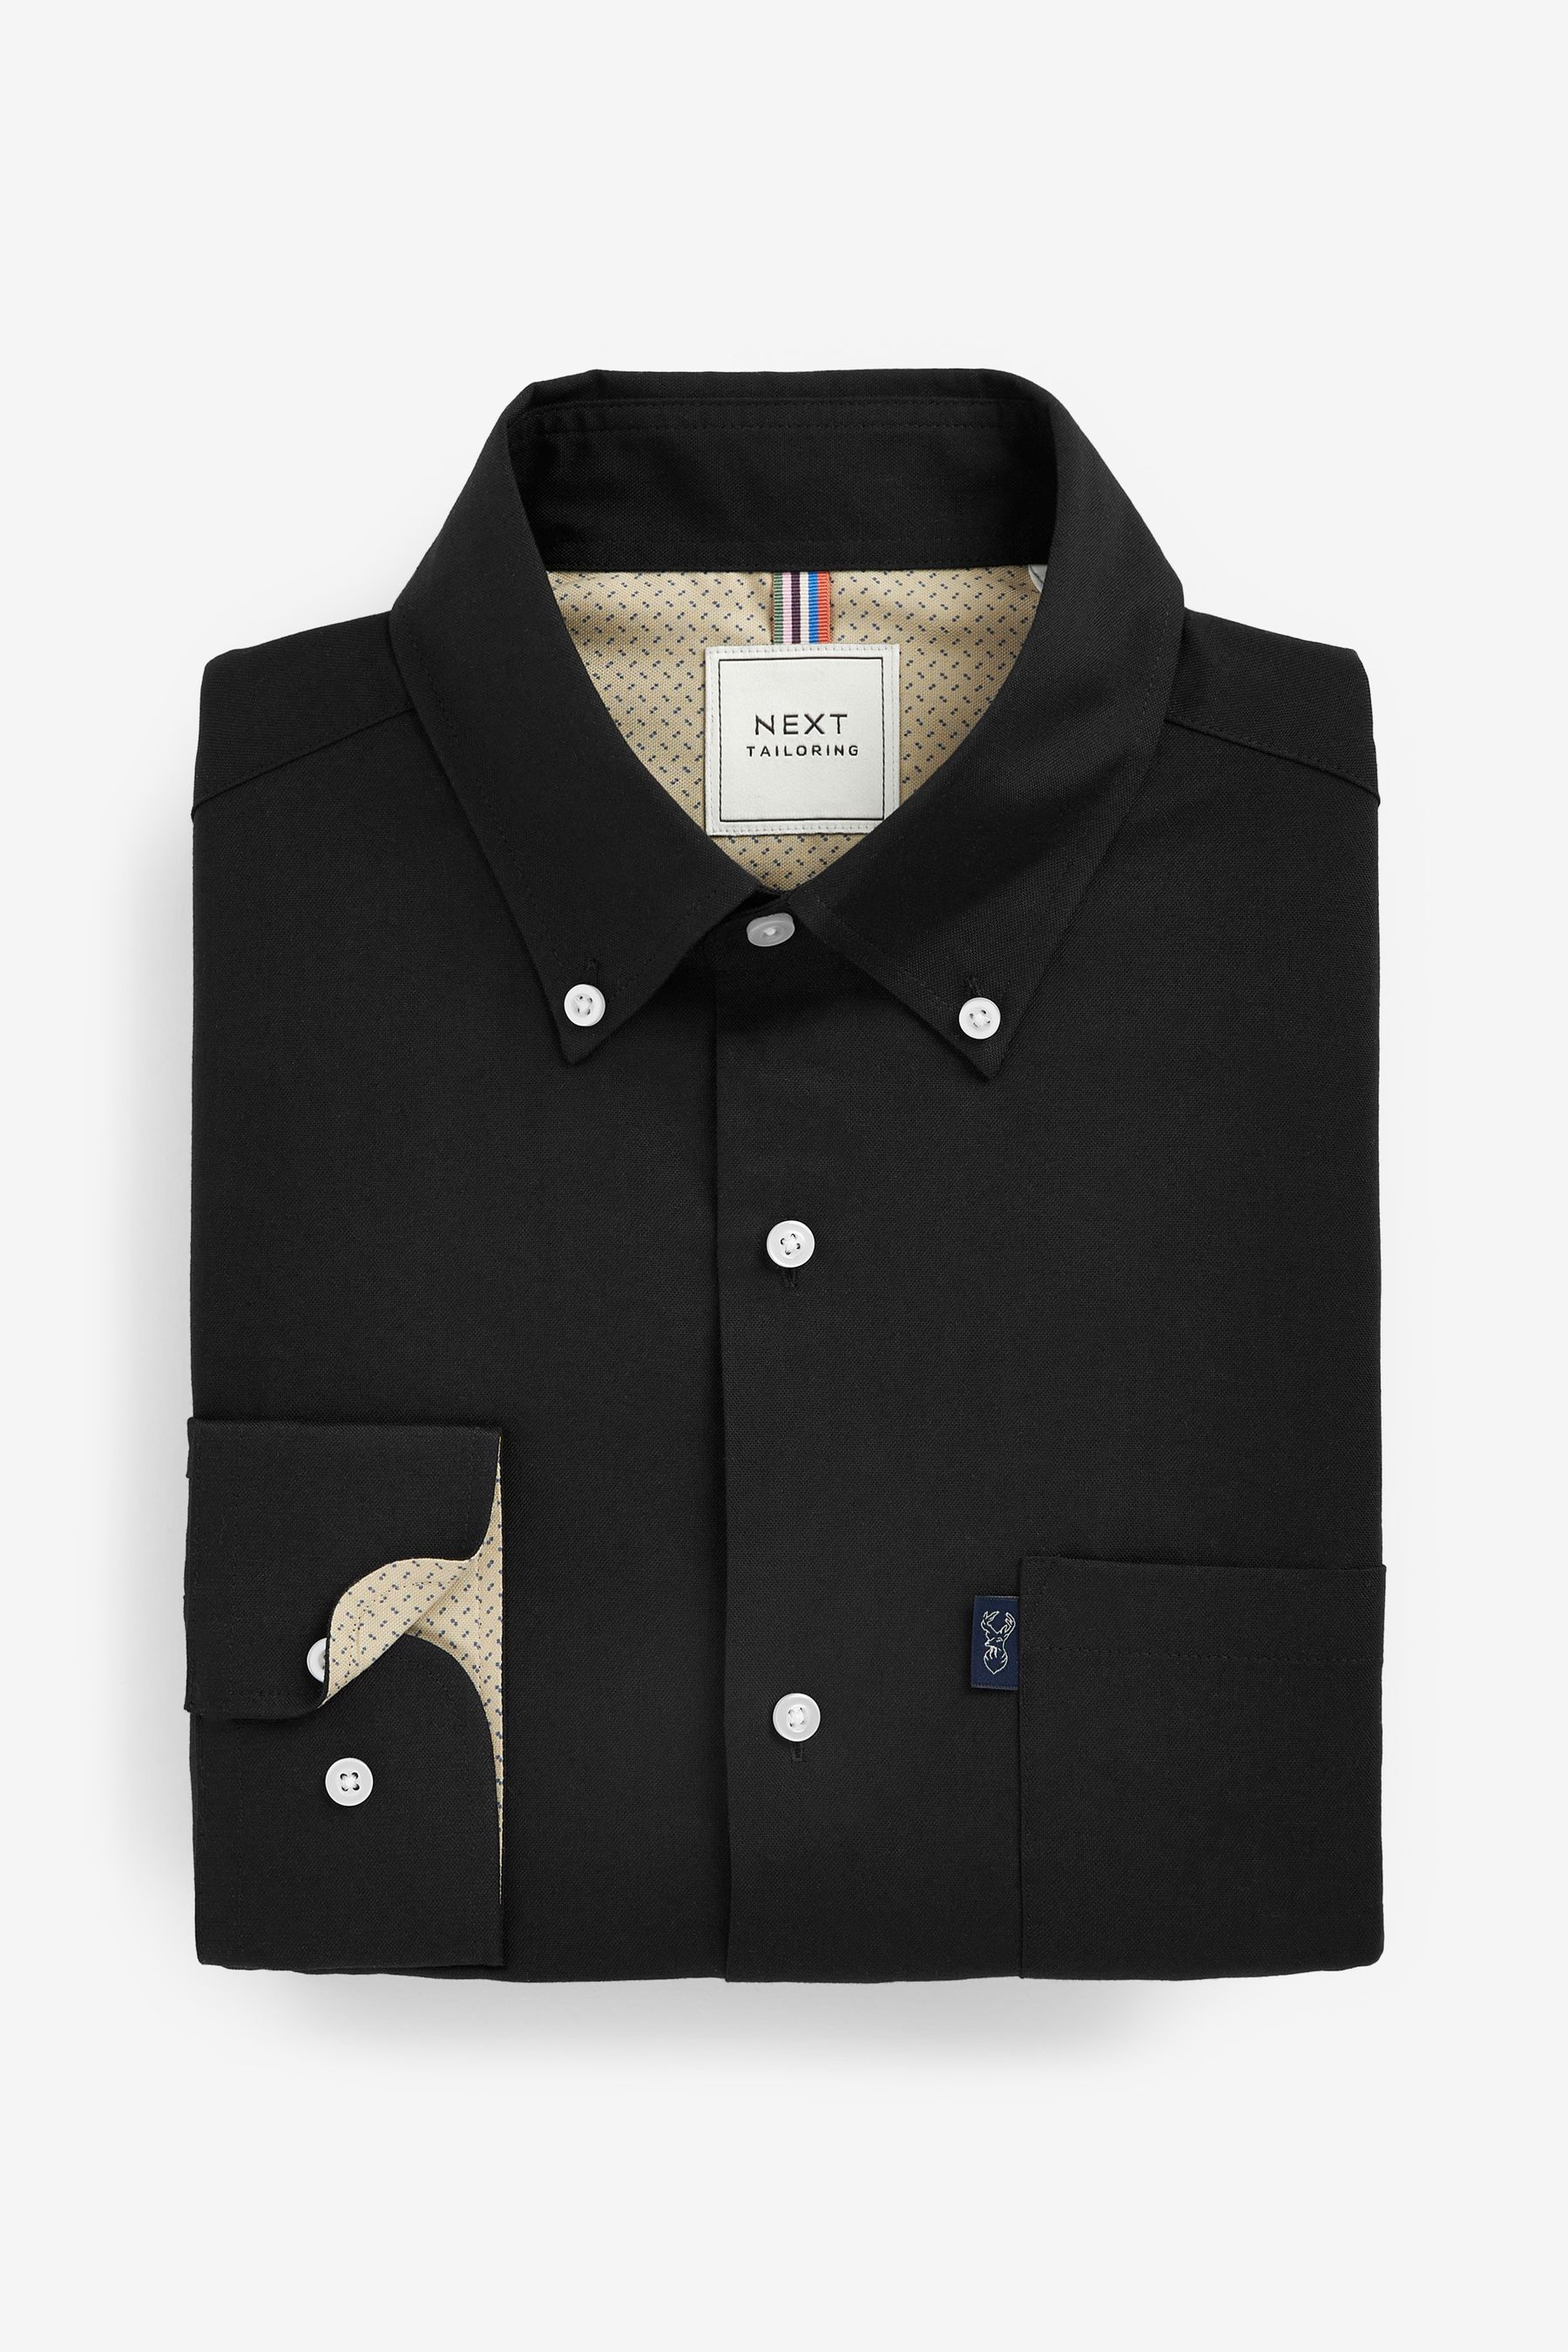 Buy Easy Iron Button Down Oxford Shirt from the Next UK online shop